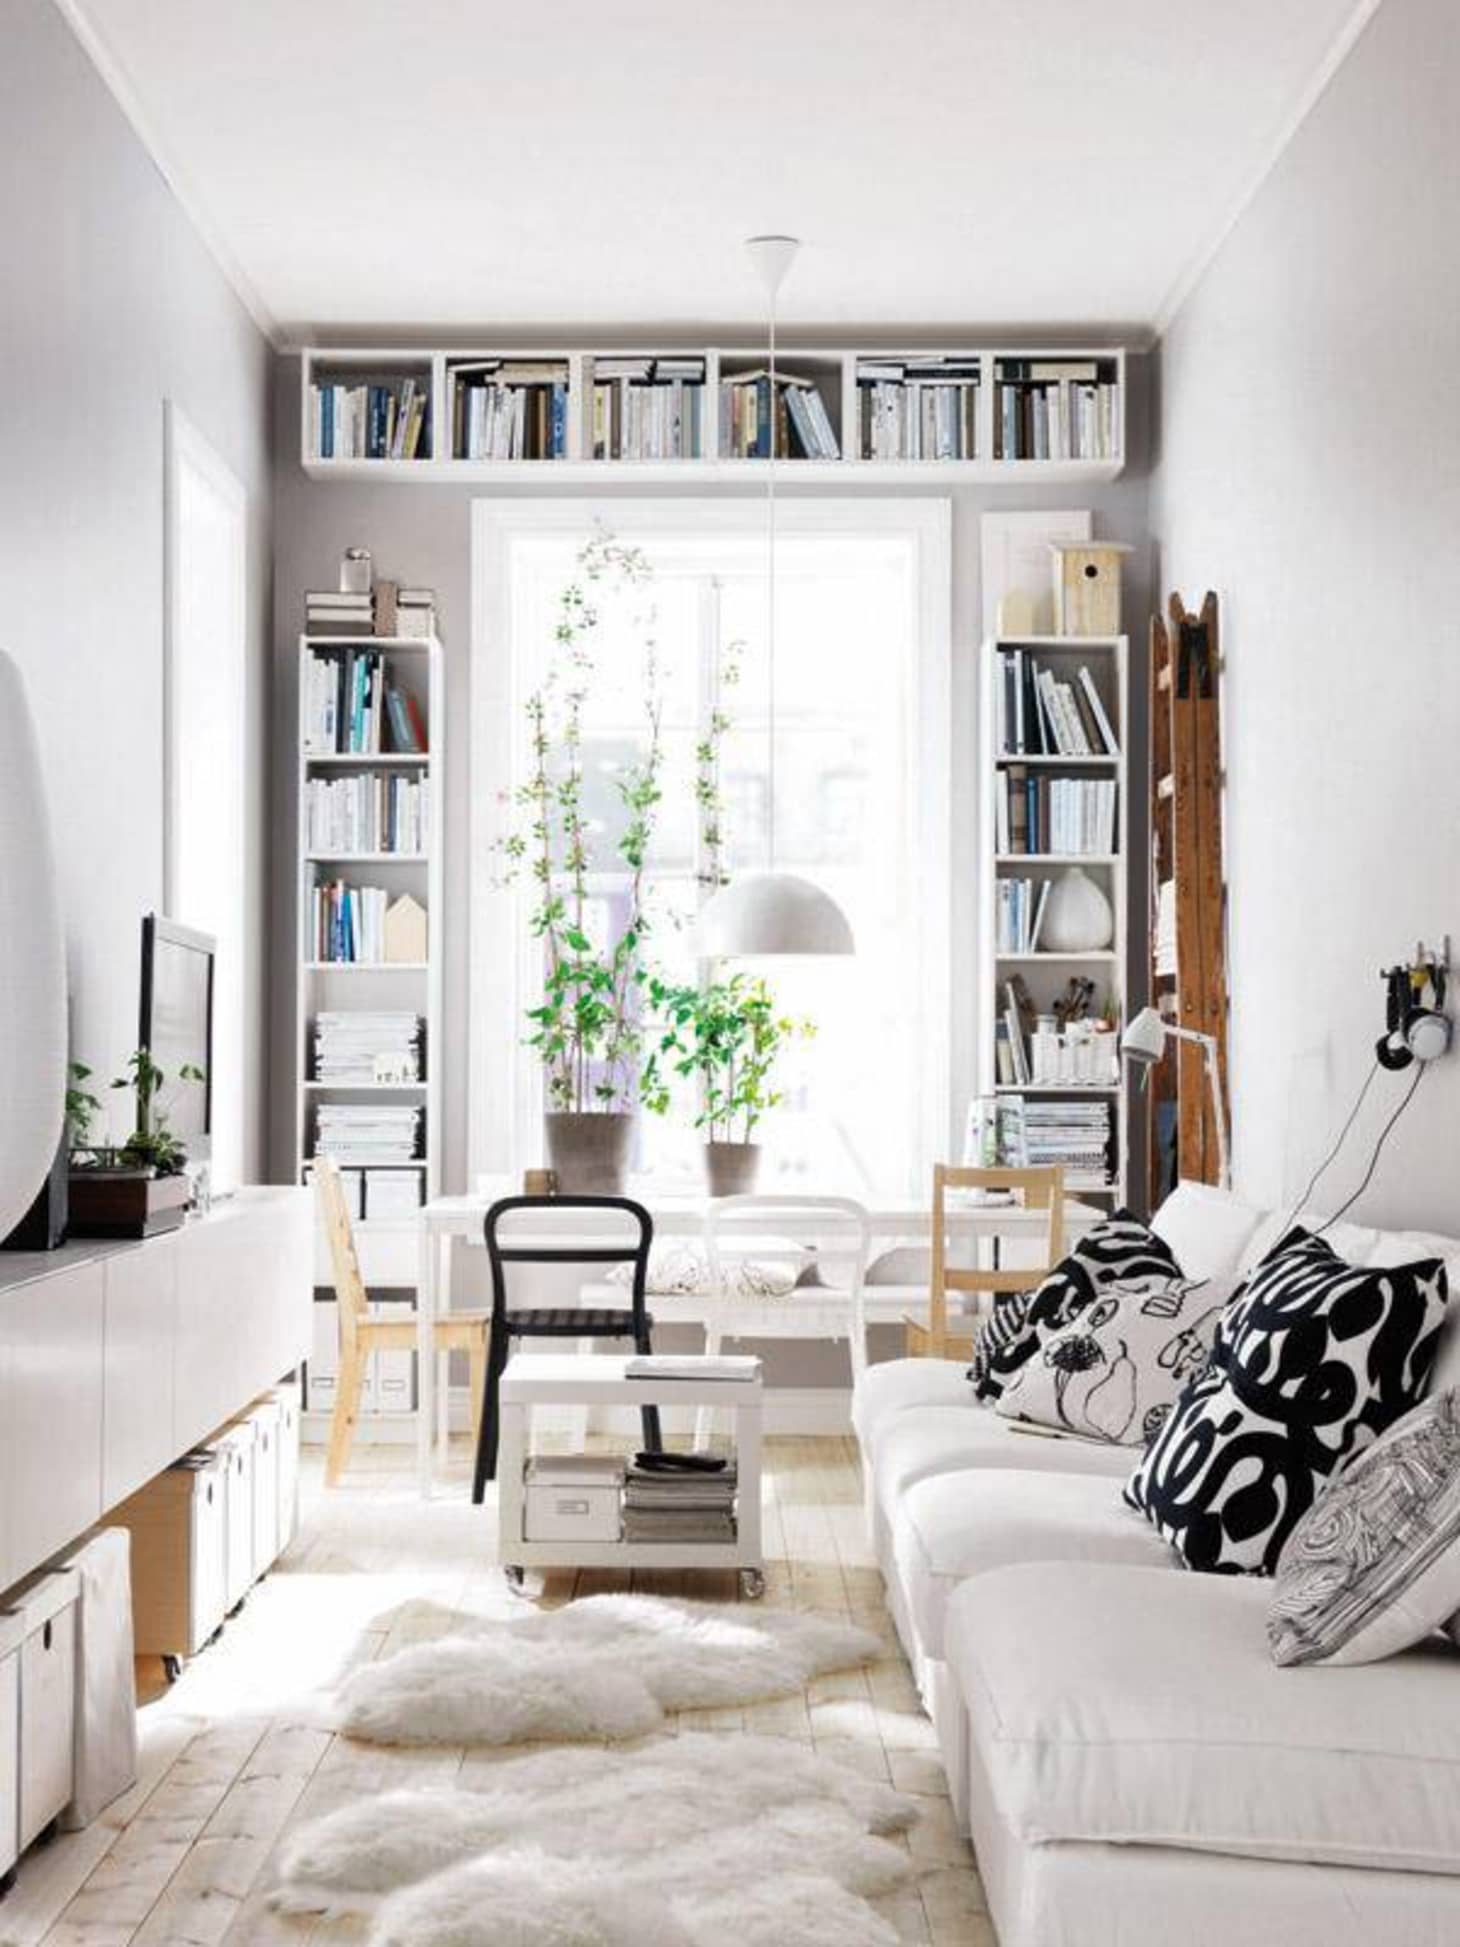 30 Small Living Room Decorating & Design Ideas - How to ...